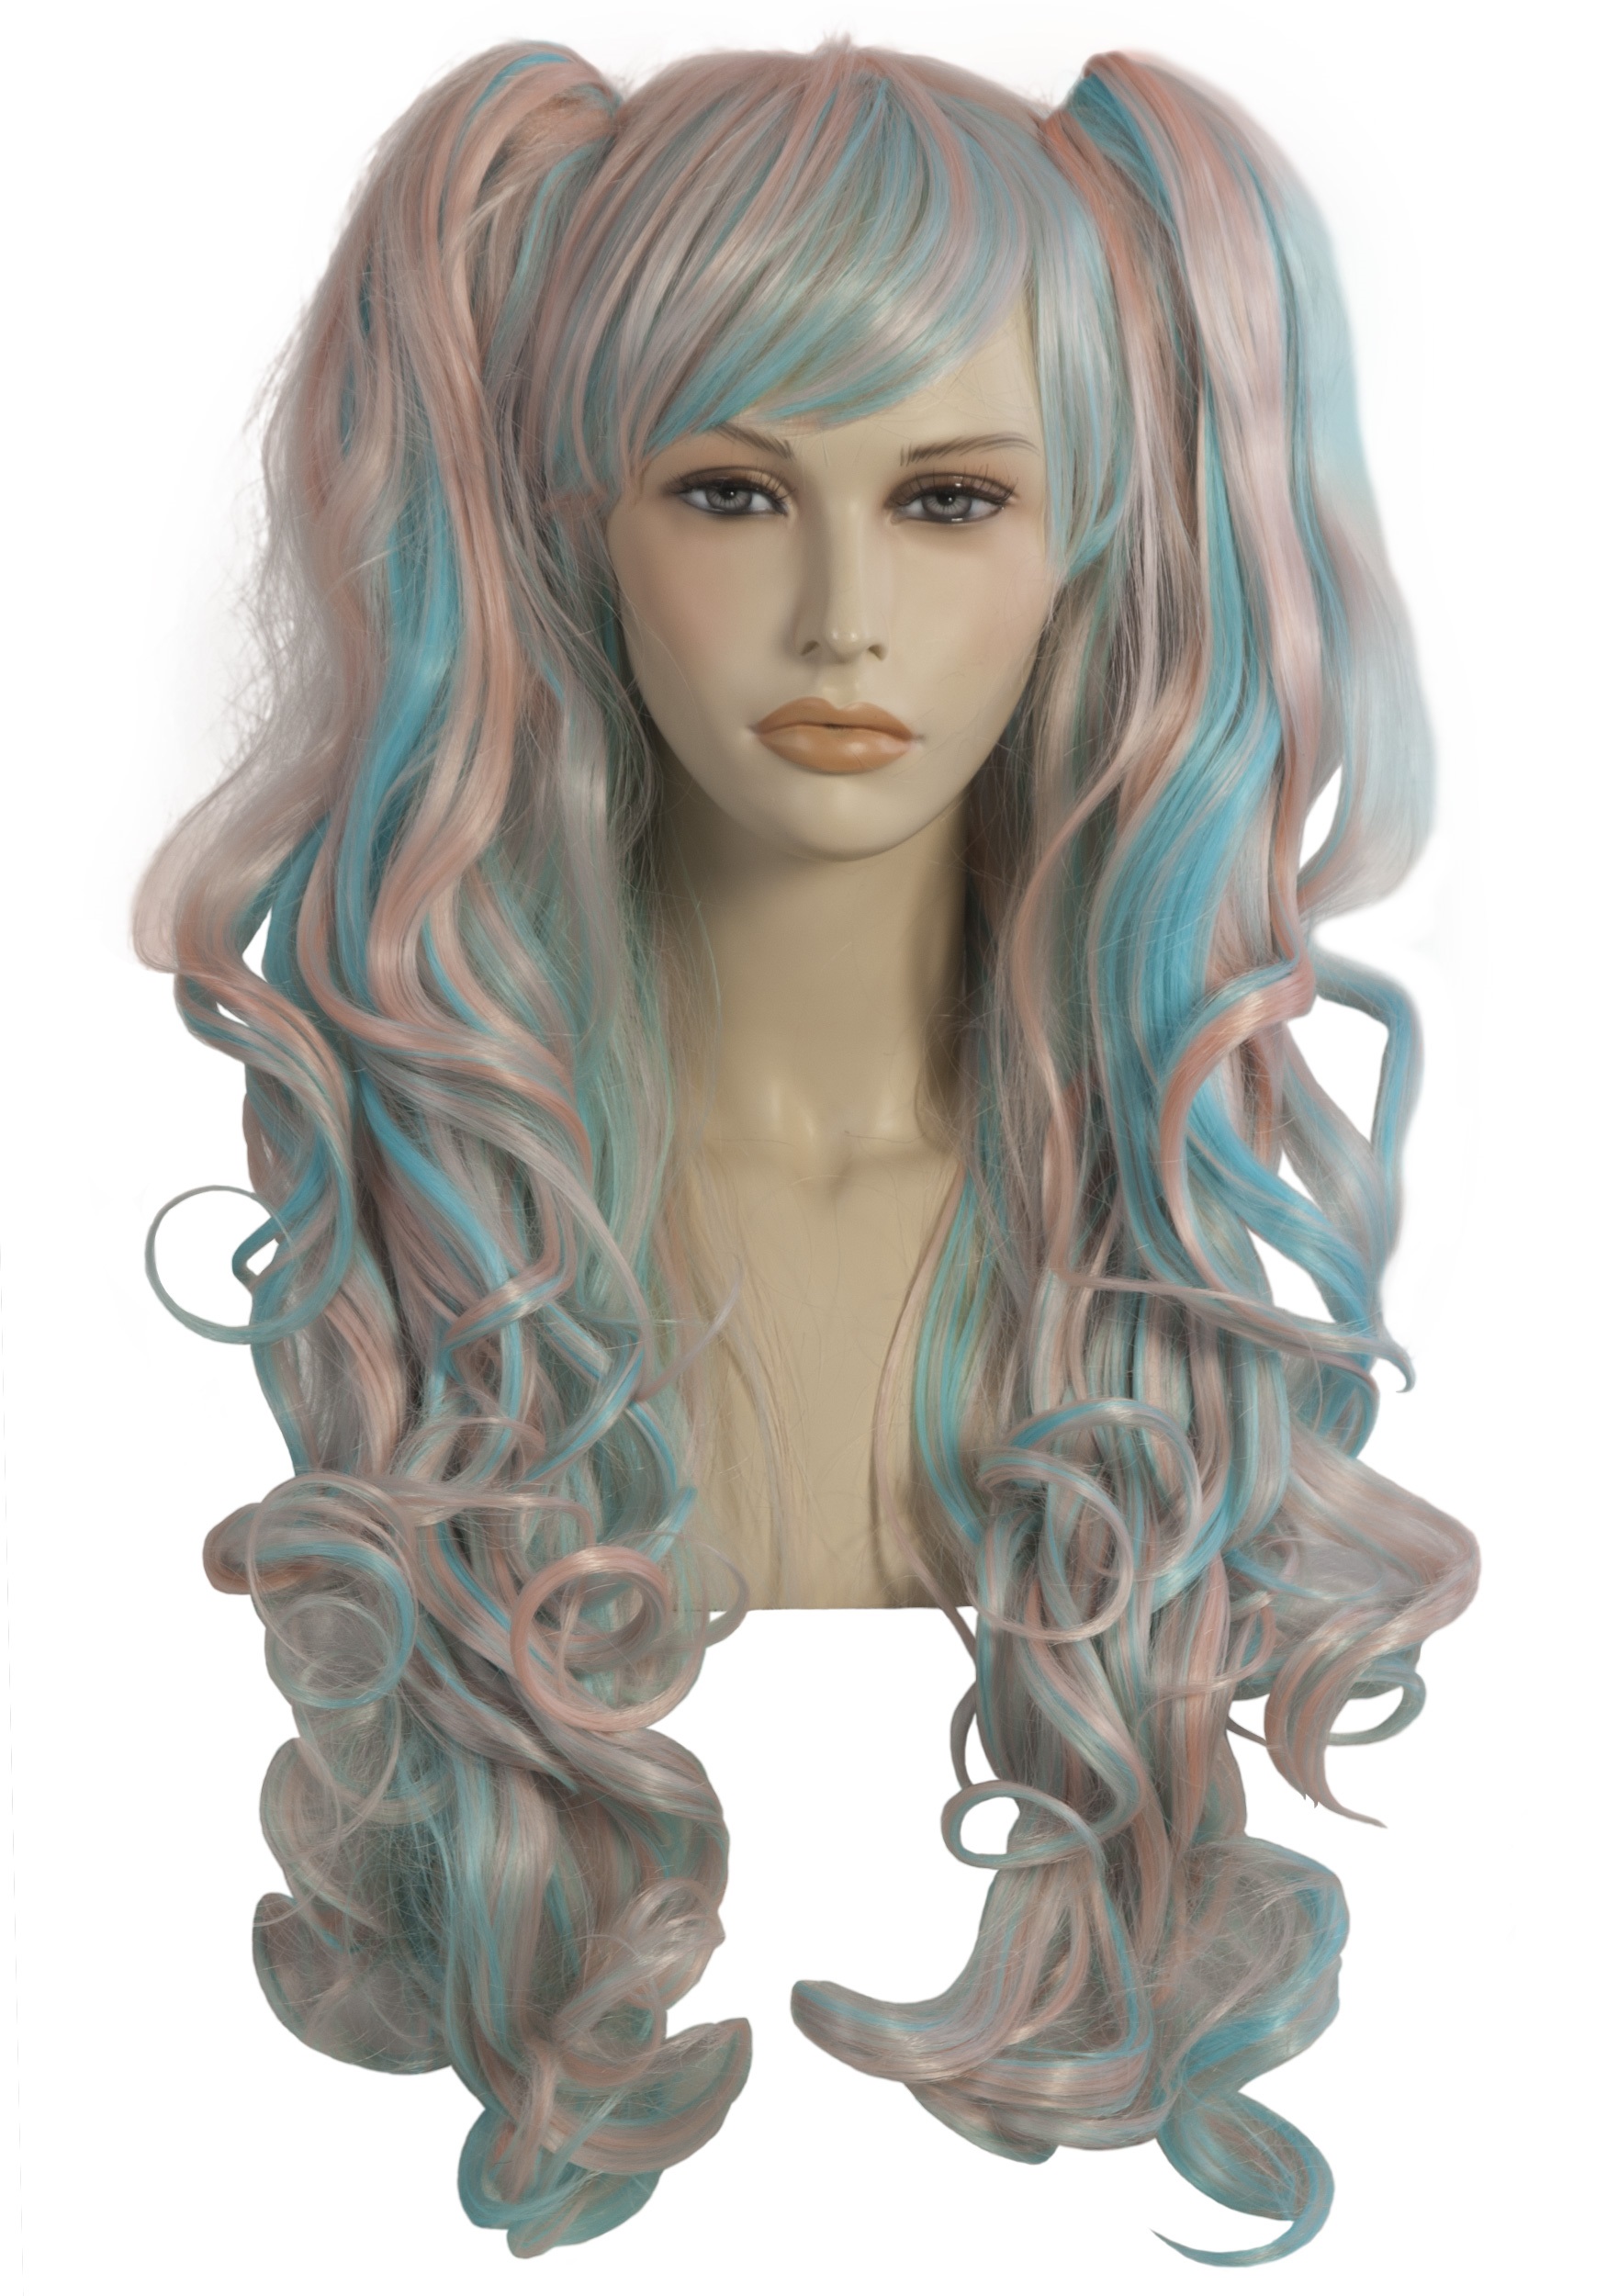 http://images.halloweencostumes.com/products/7244/1-1/candy-wig.jpg